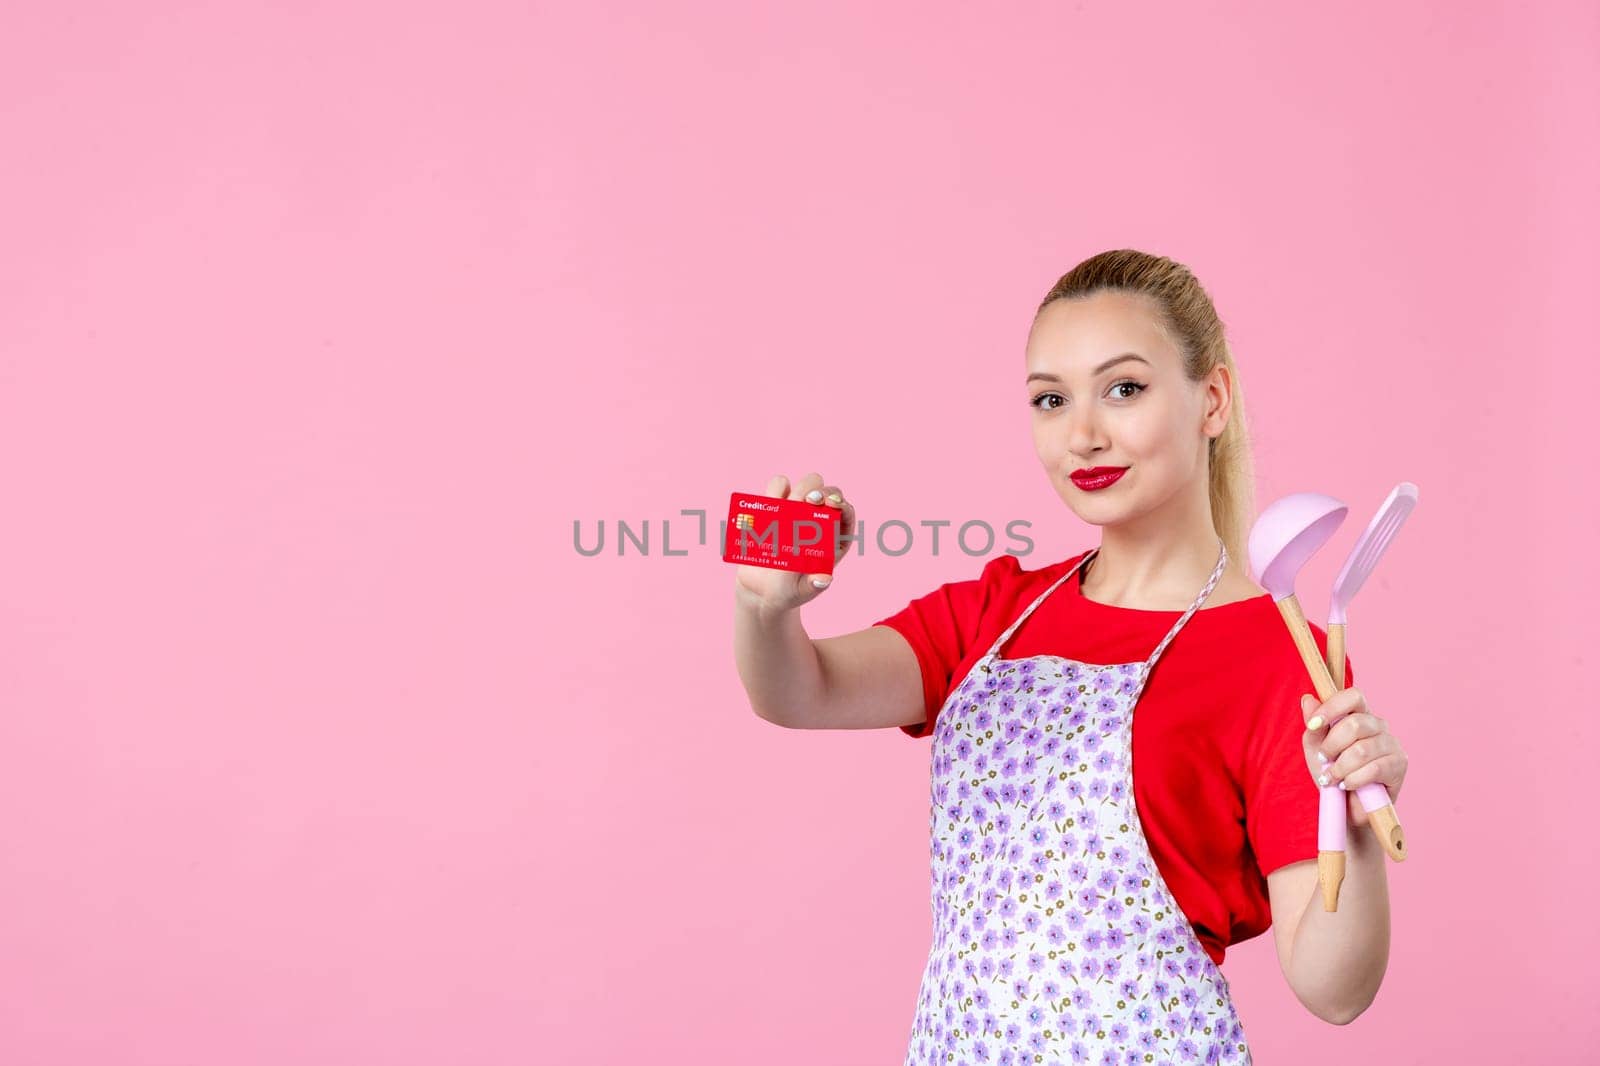 front view young housewife in cape holding spoons and bank card on pink background occupation duty money horizontal wife profession uniform job cutlery